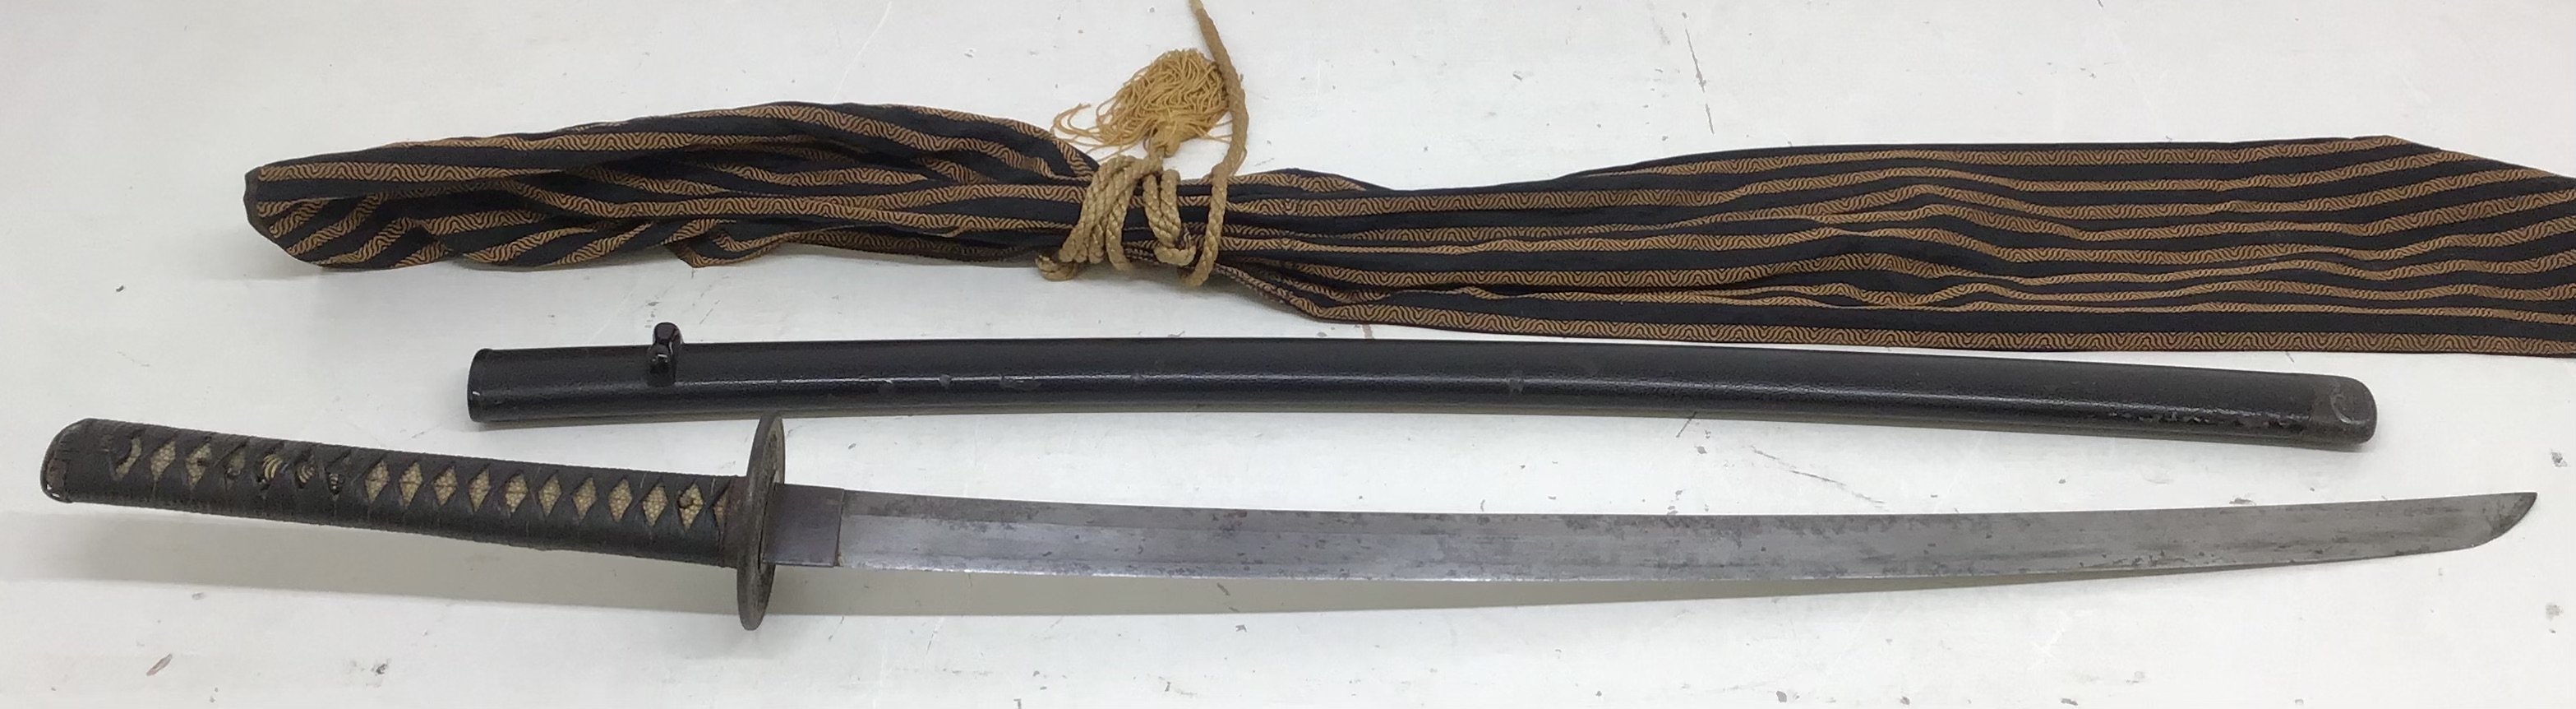 19th Century Japanese Katana Sword (blade could be older), Signature to tang, black lacquered - Image 2 of 21